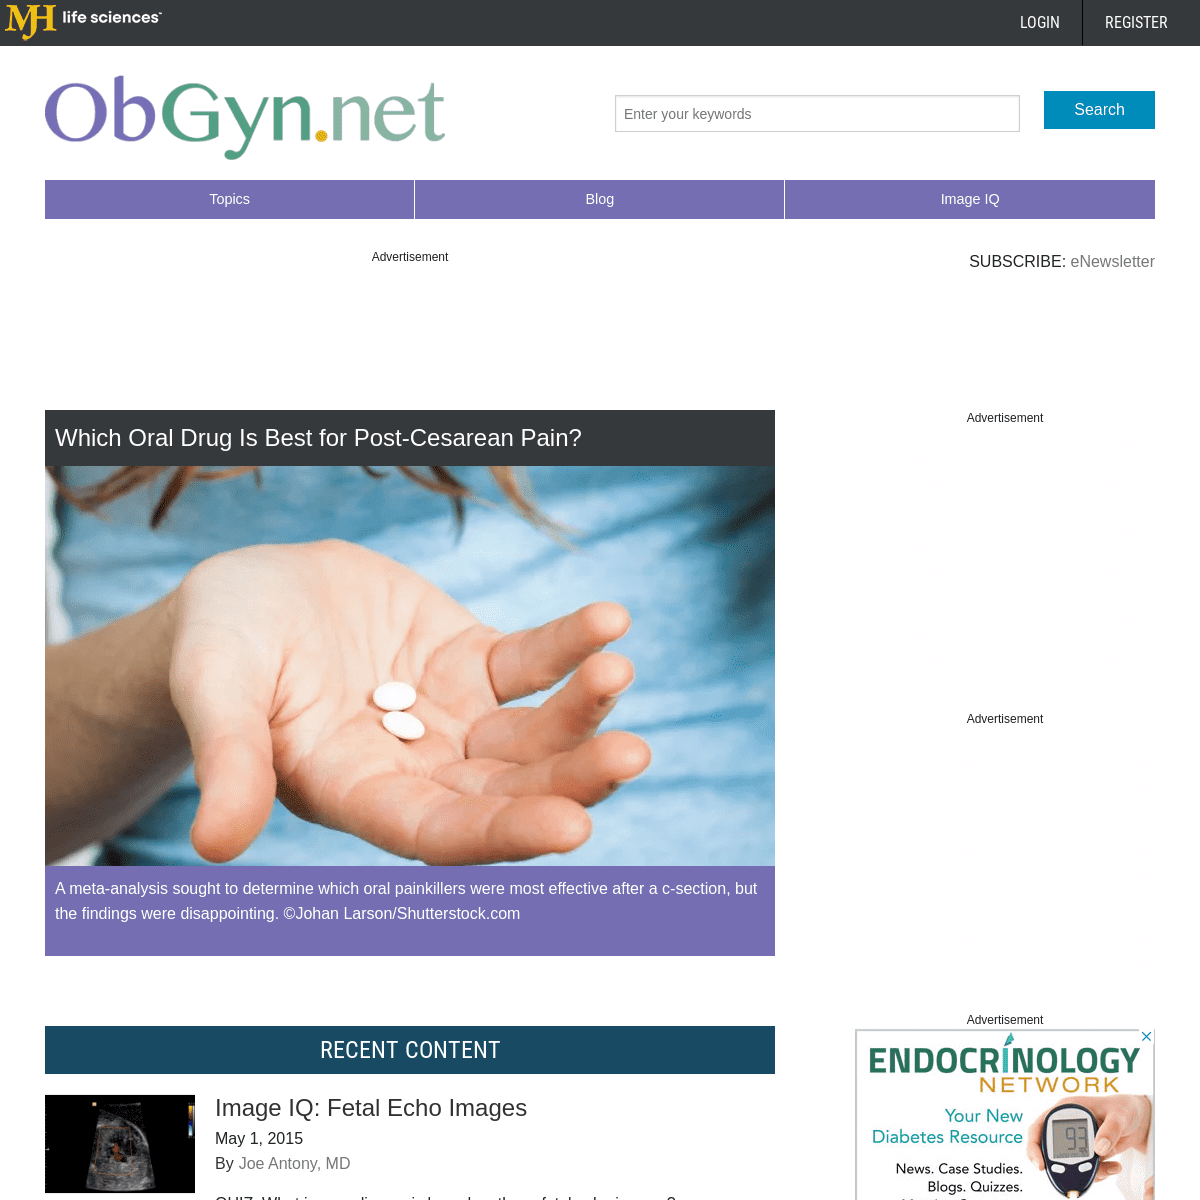 A complete backup of obgyn.net